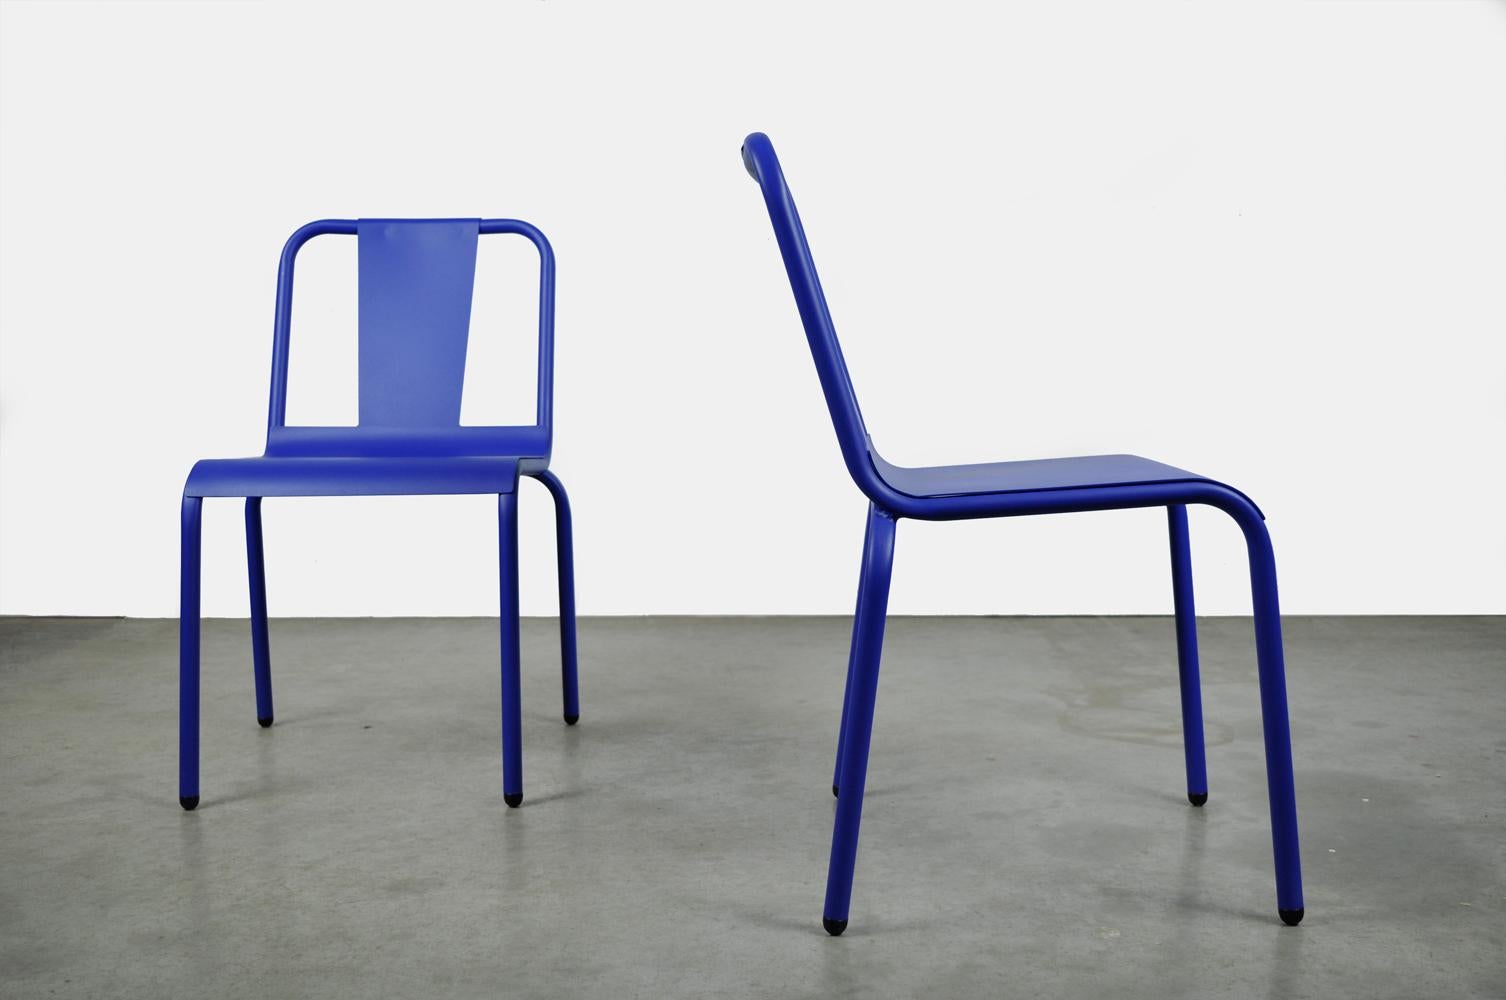 Set of 6 Design Chairs by Isi Design Group, Produced by Isimar, 2000 Spain 2